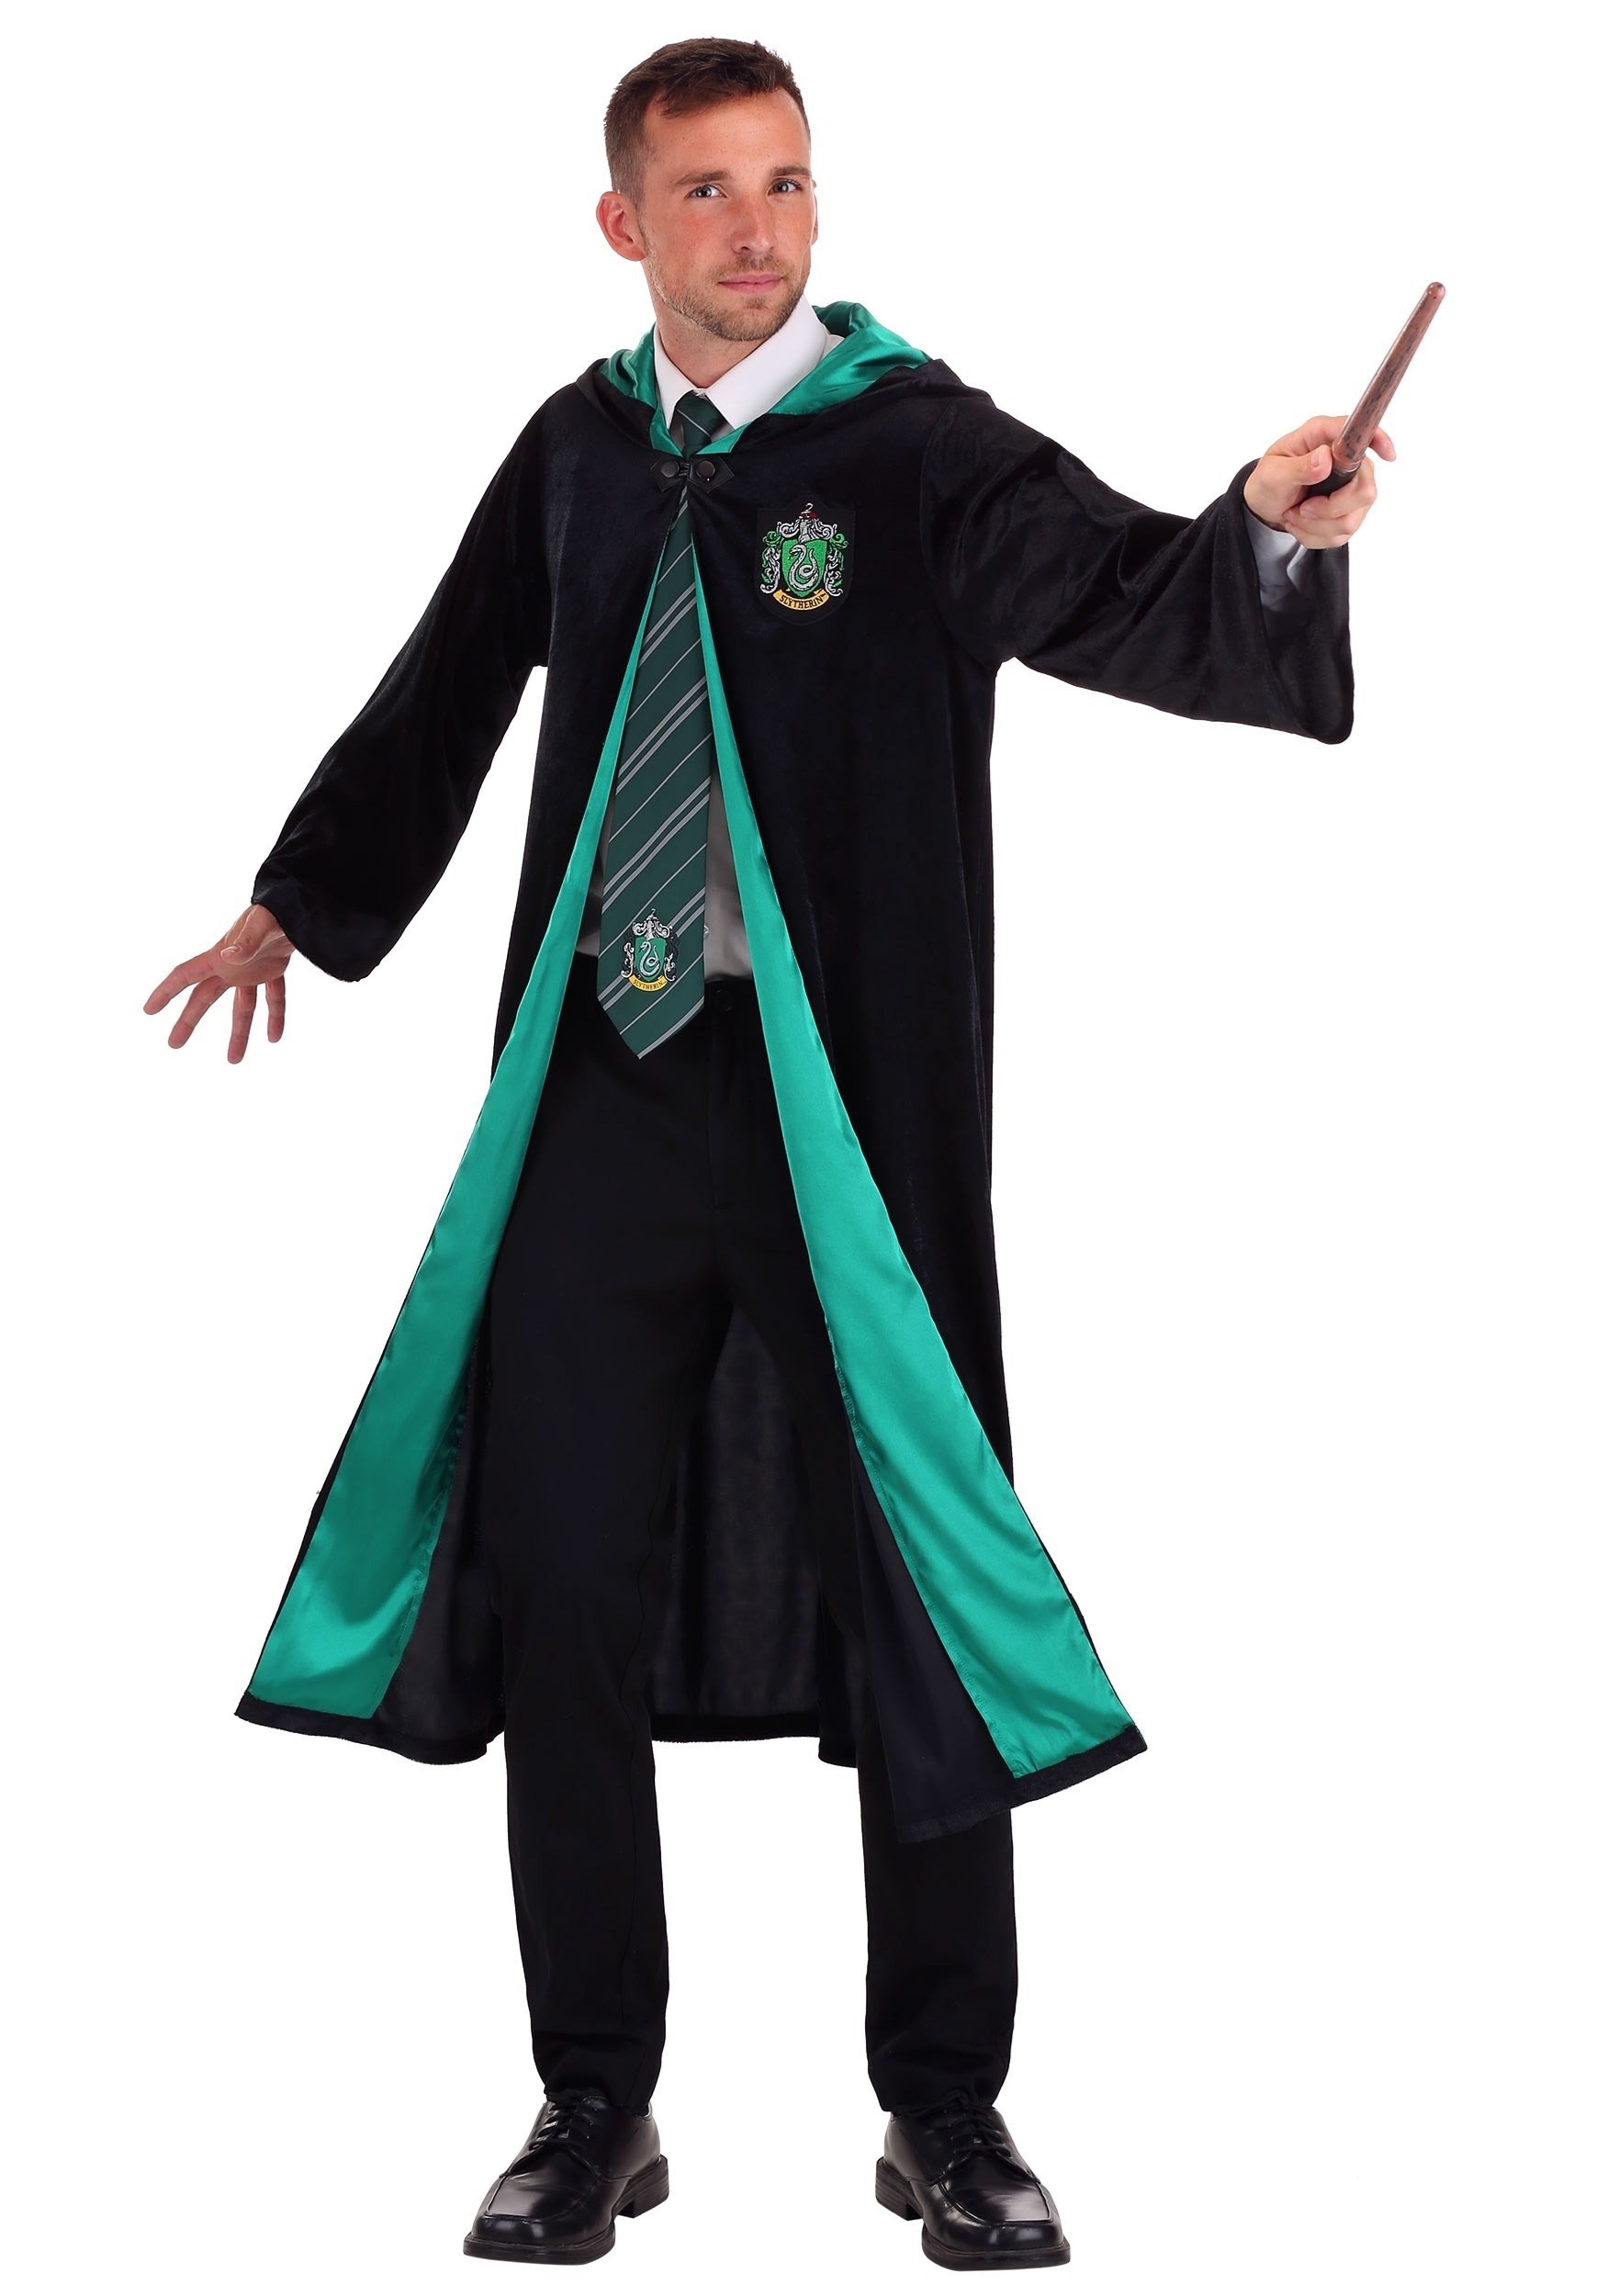 Photos - Fancy Dress Potter Jerry Leigh Harry  Deluxe Slytherin Robe for Adults Black/Green 